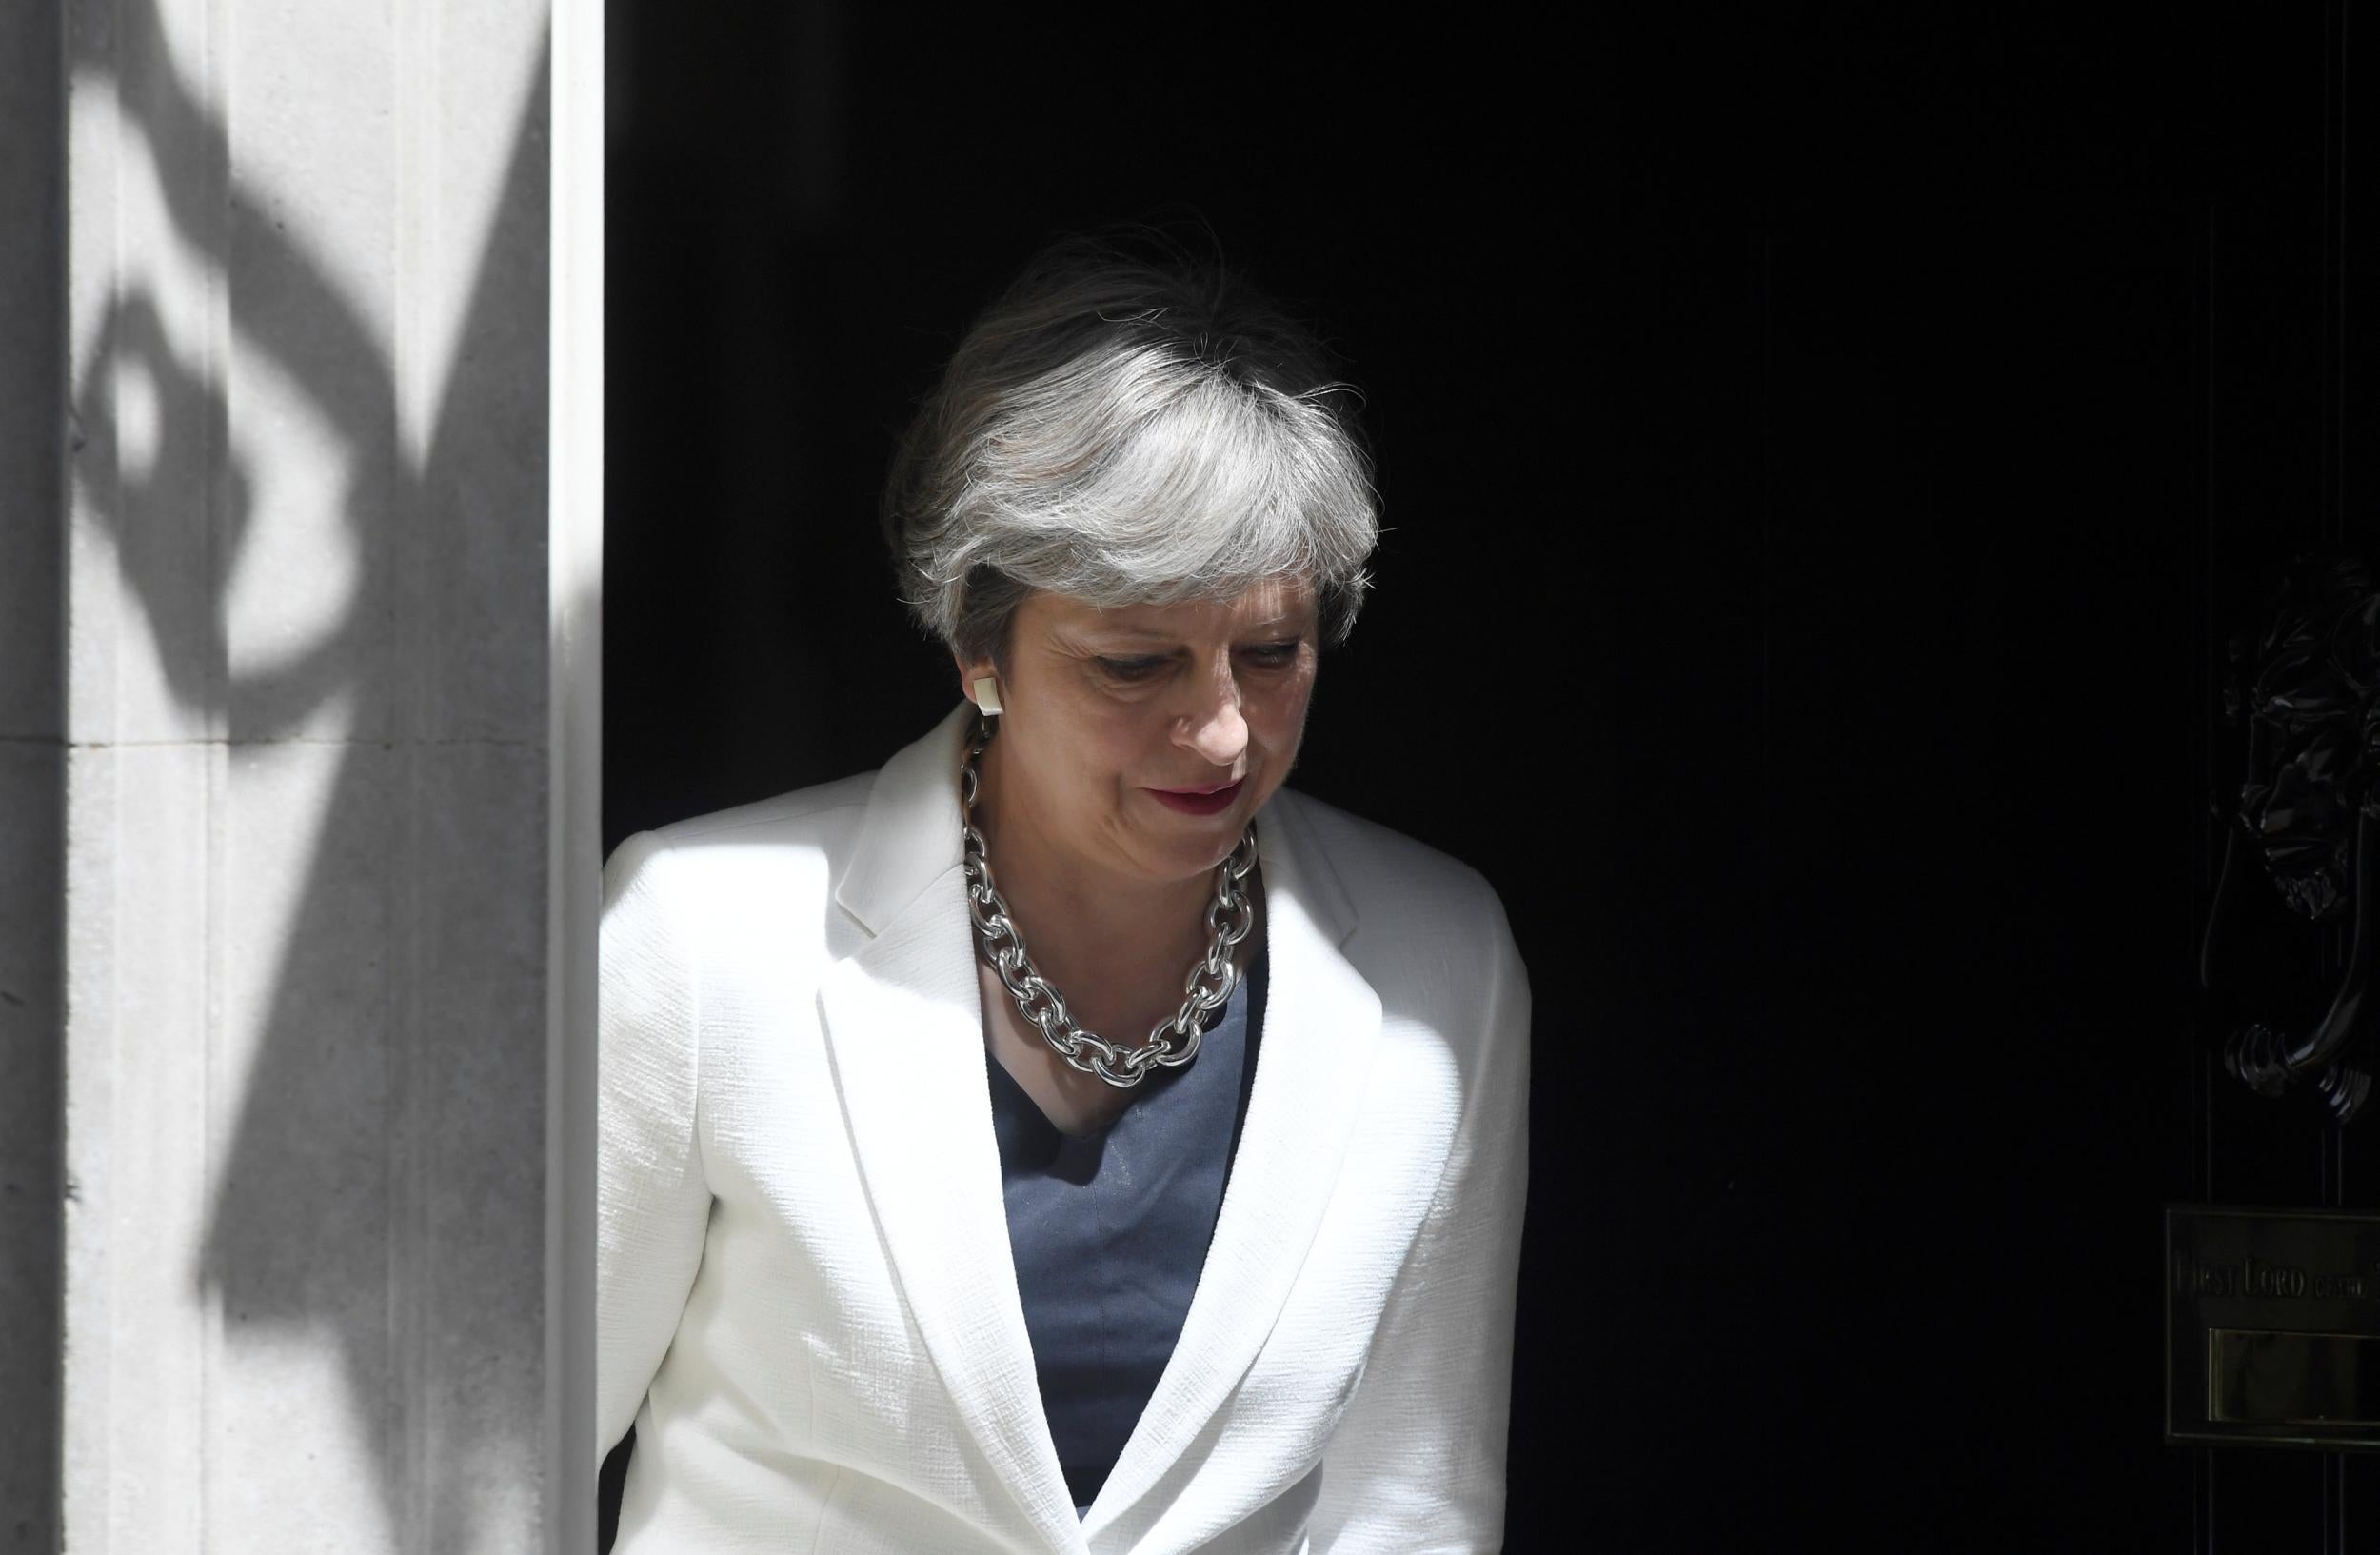 The PM is unlikely to lead her party into the next election